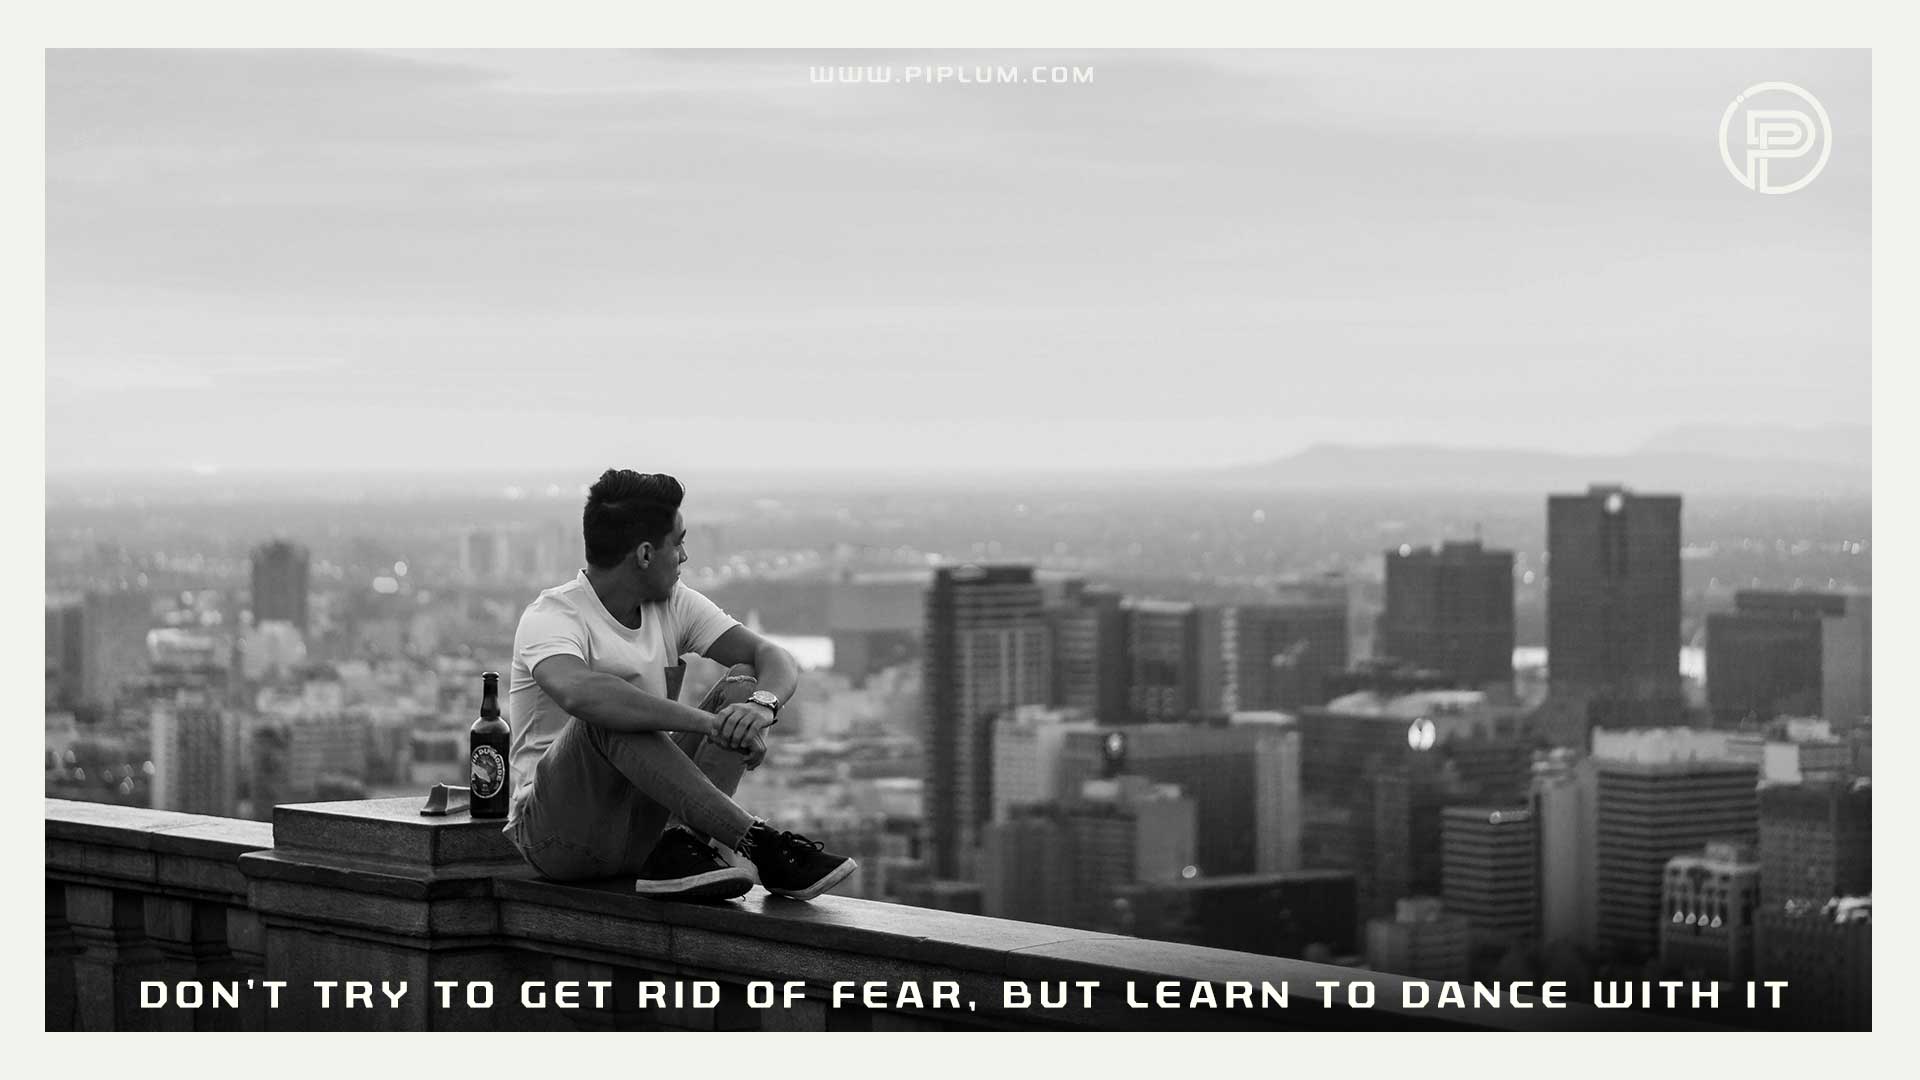 Don’t-try-to-get-rid-of fear-but-learn-to-dance-with-it-Motivational-fear-quote